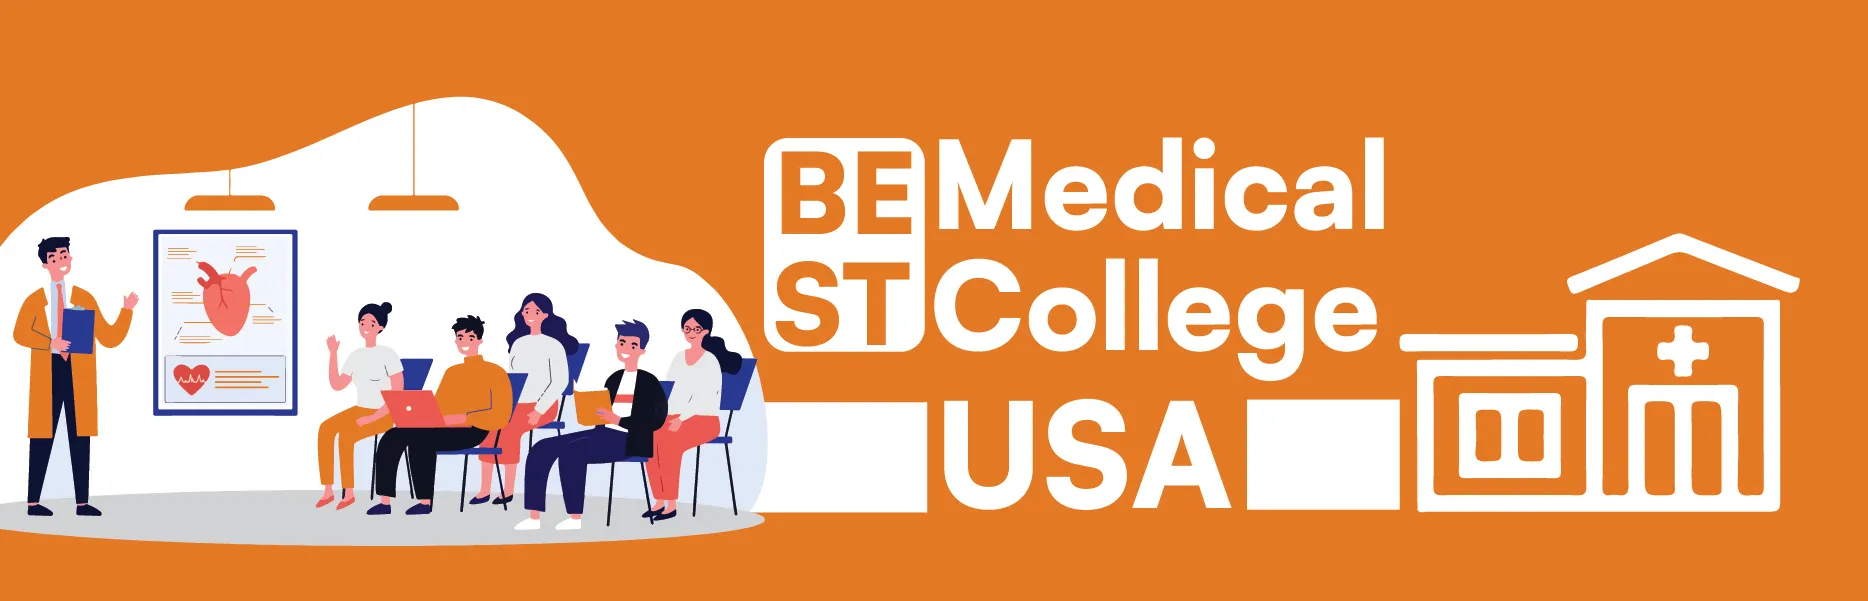 MBBS Colleges in USA: Top 10 Medical Colleges in USA for Indian Students Image